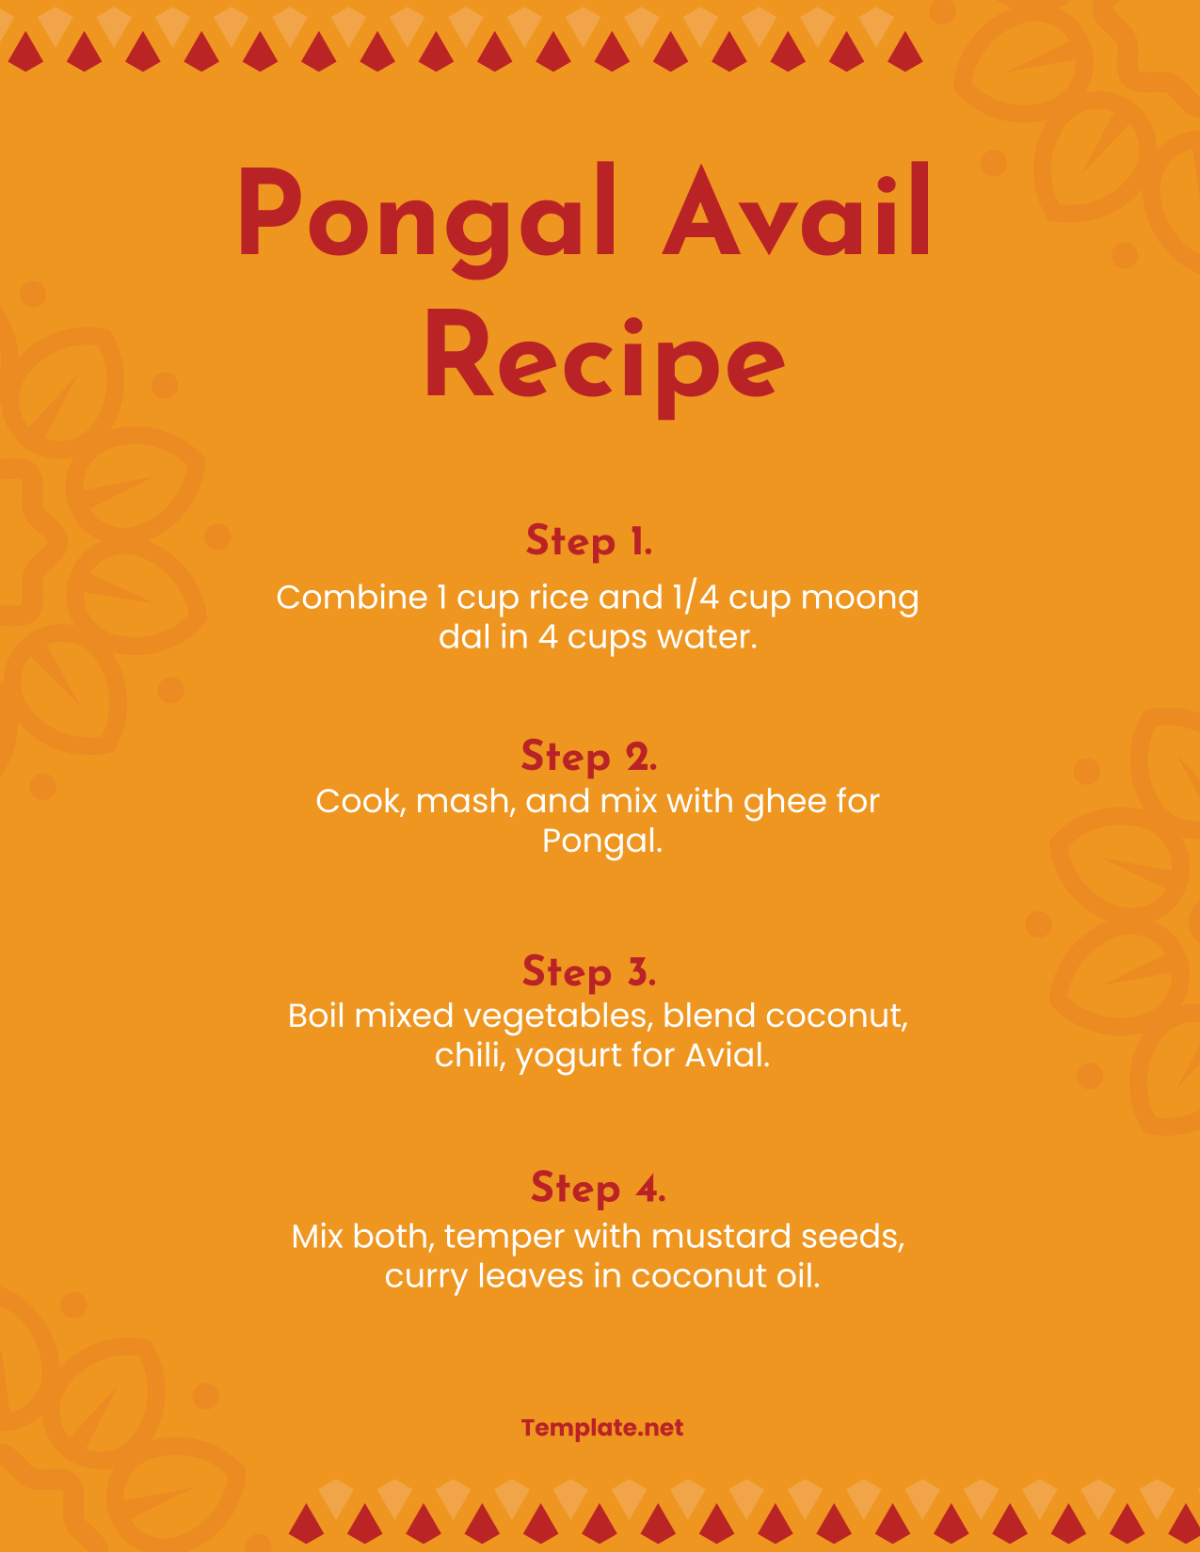 Pongal Avail Recipe Template